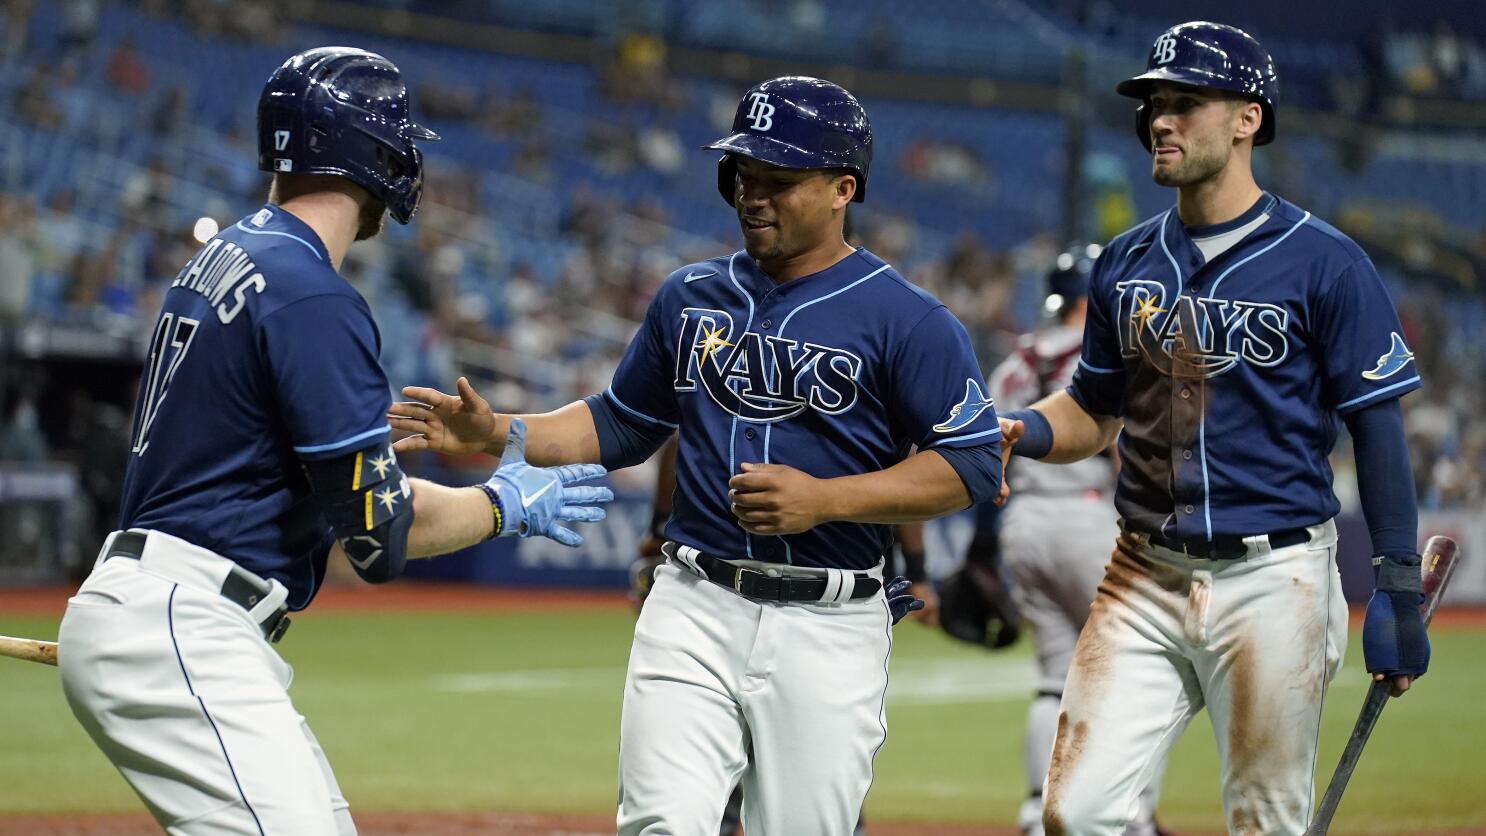 Toro HRs for first hit with Brewers in a 4-2 win over the Blue Jays